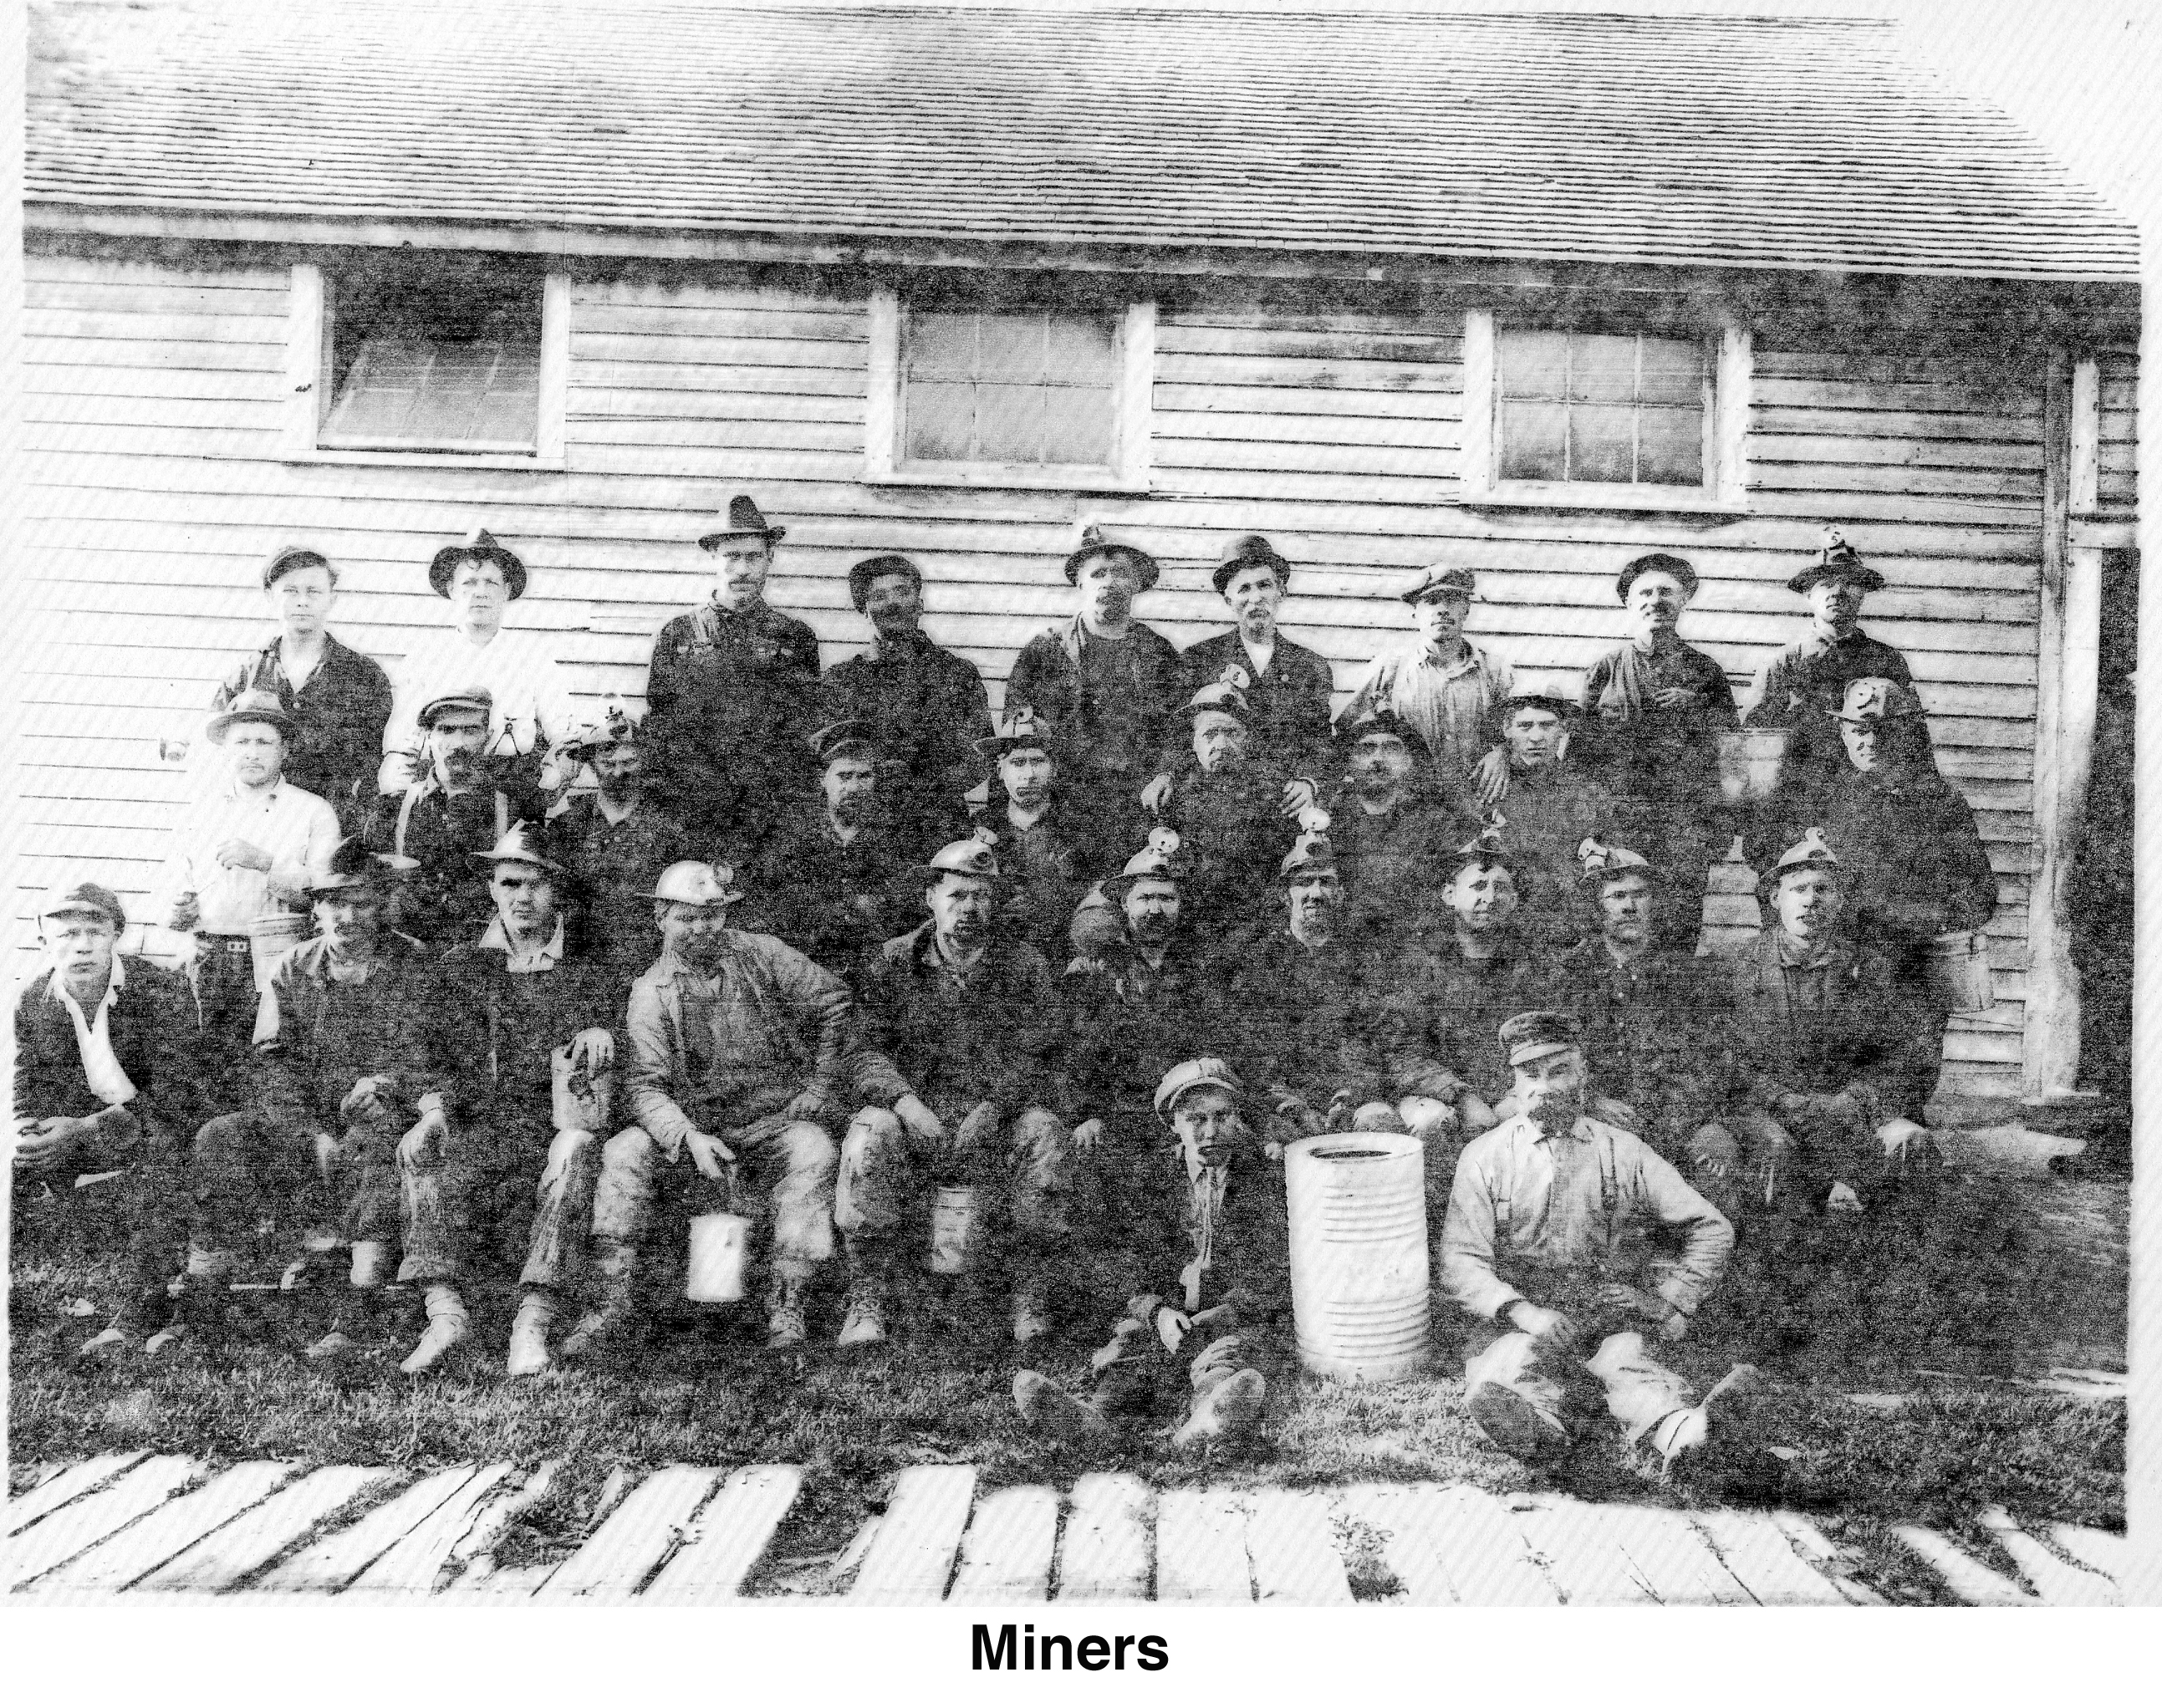 Men in mining gear in front of a building with wood siding.